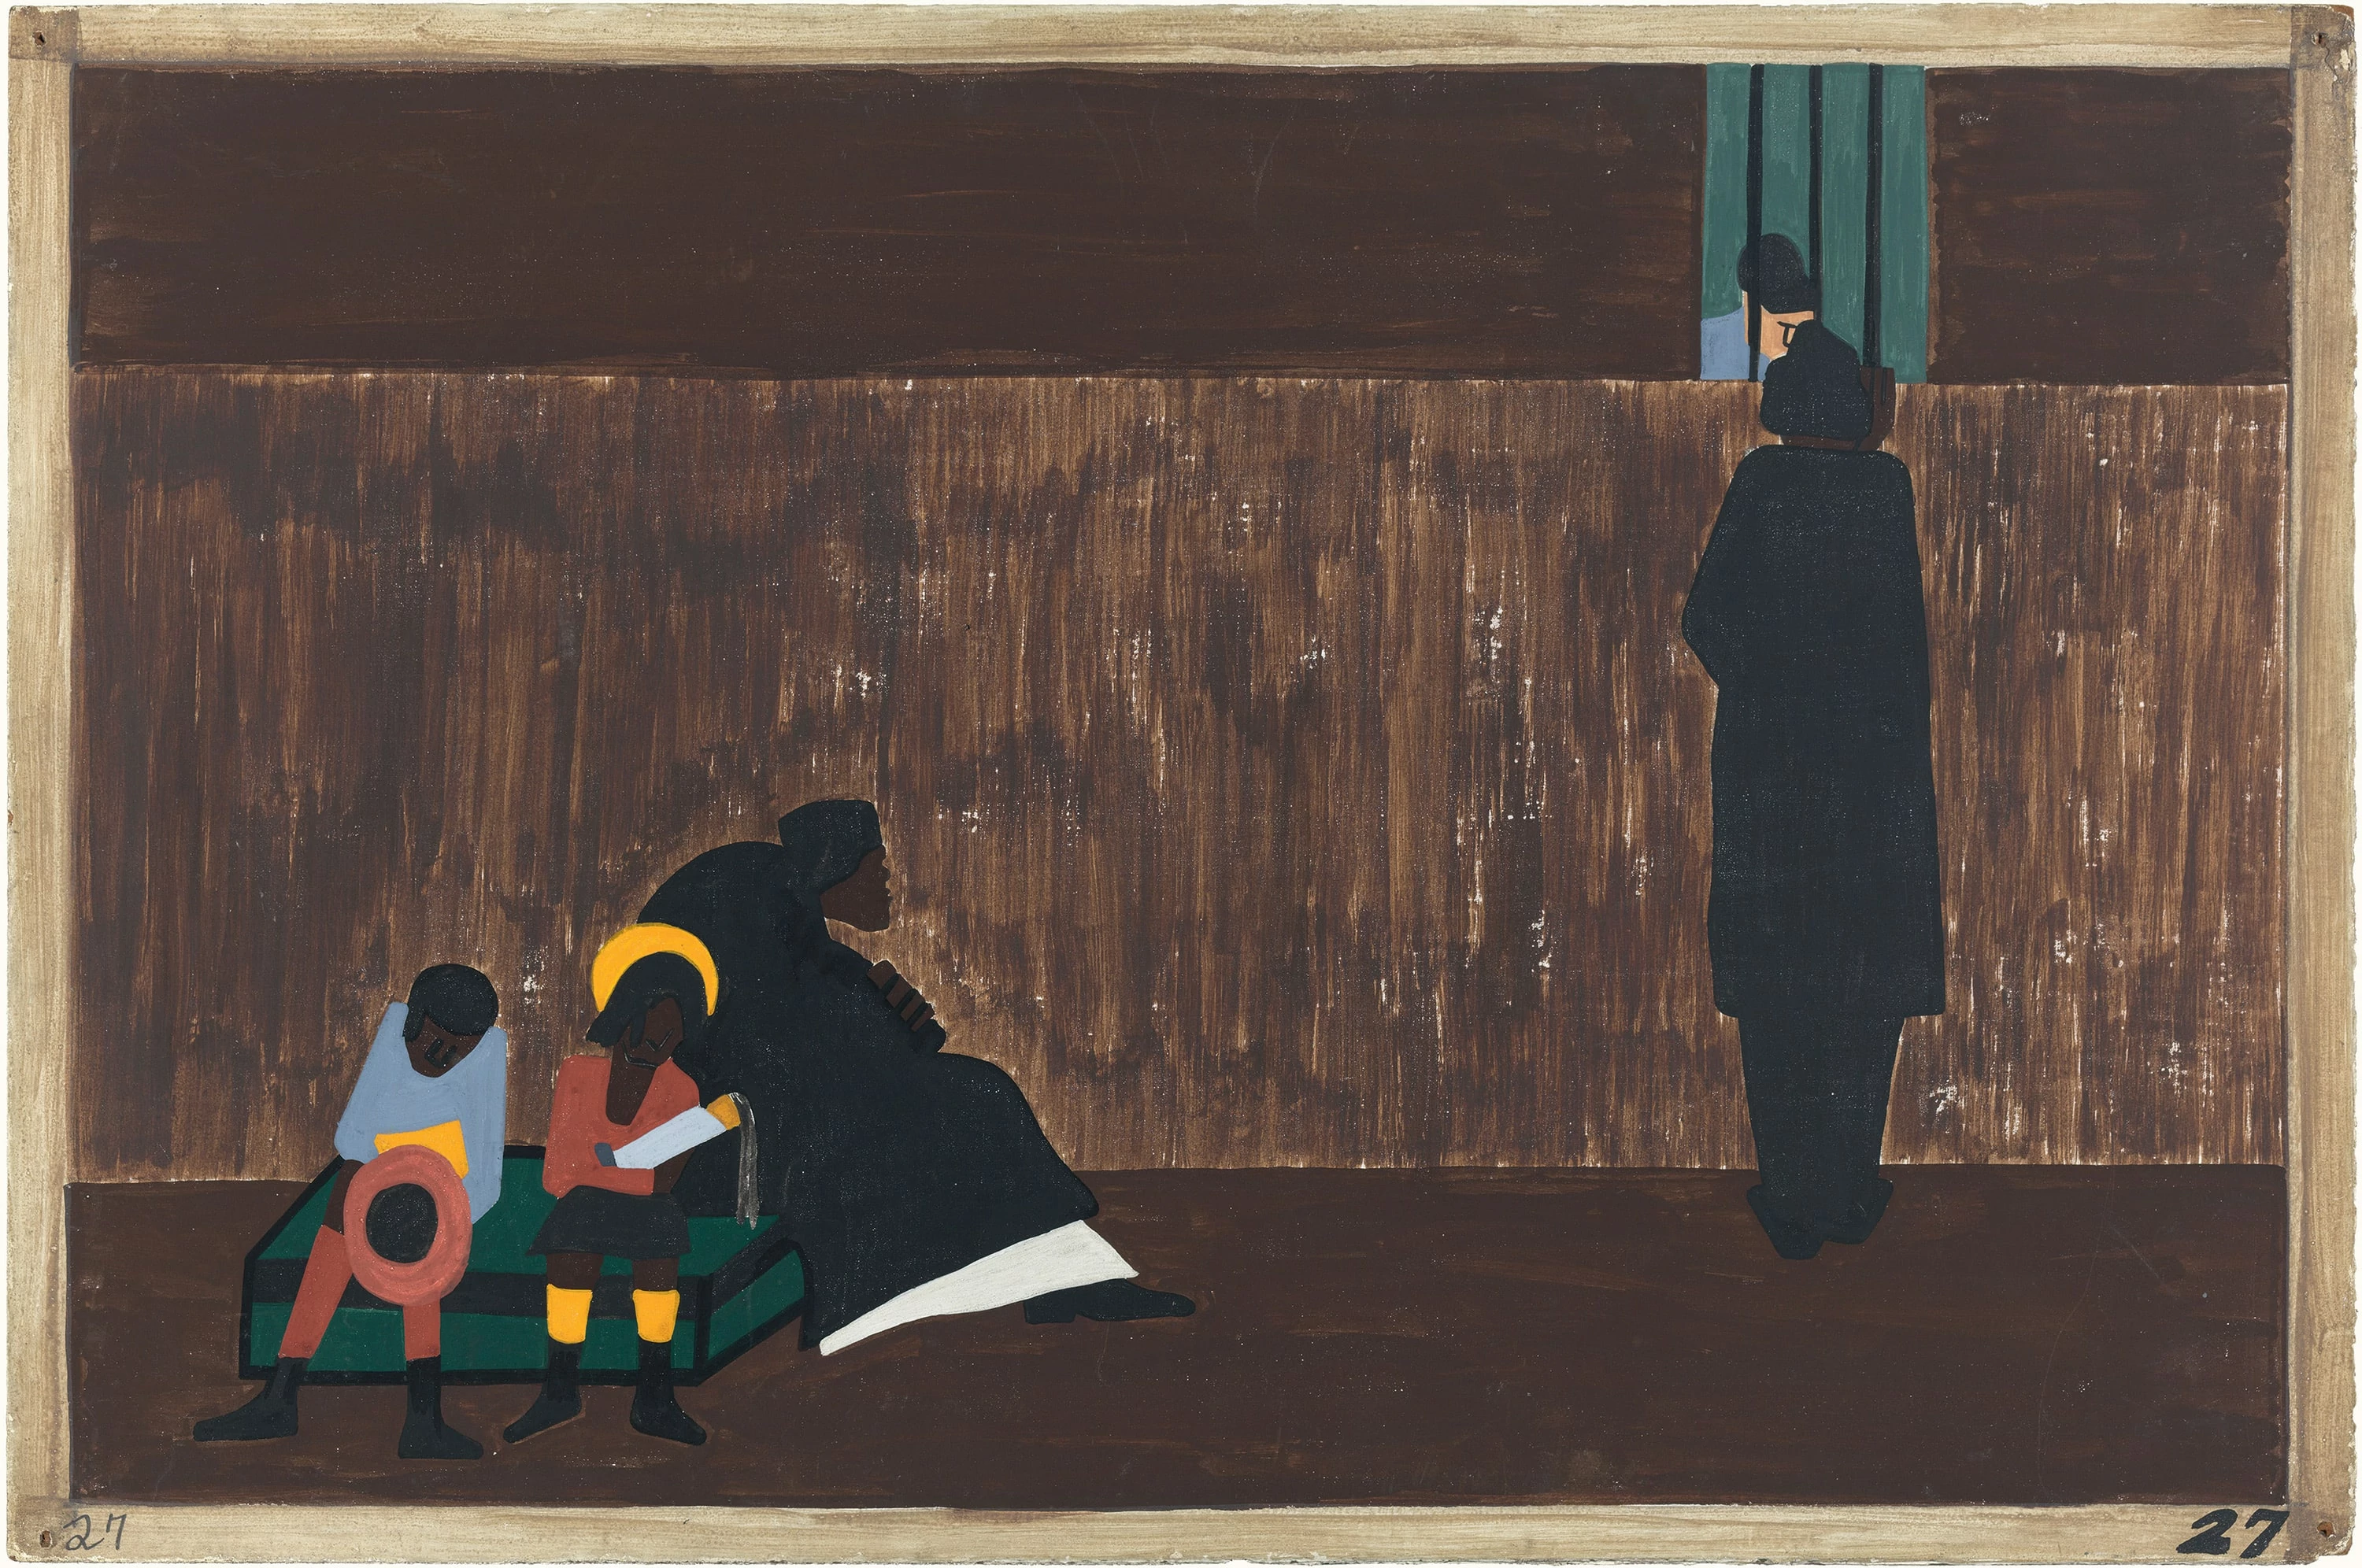 Migration Series No.27: Many men stayed behind until they could take their families north with them, Jacob Lawrence